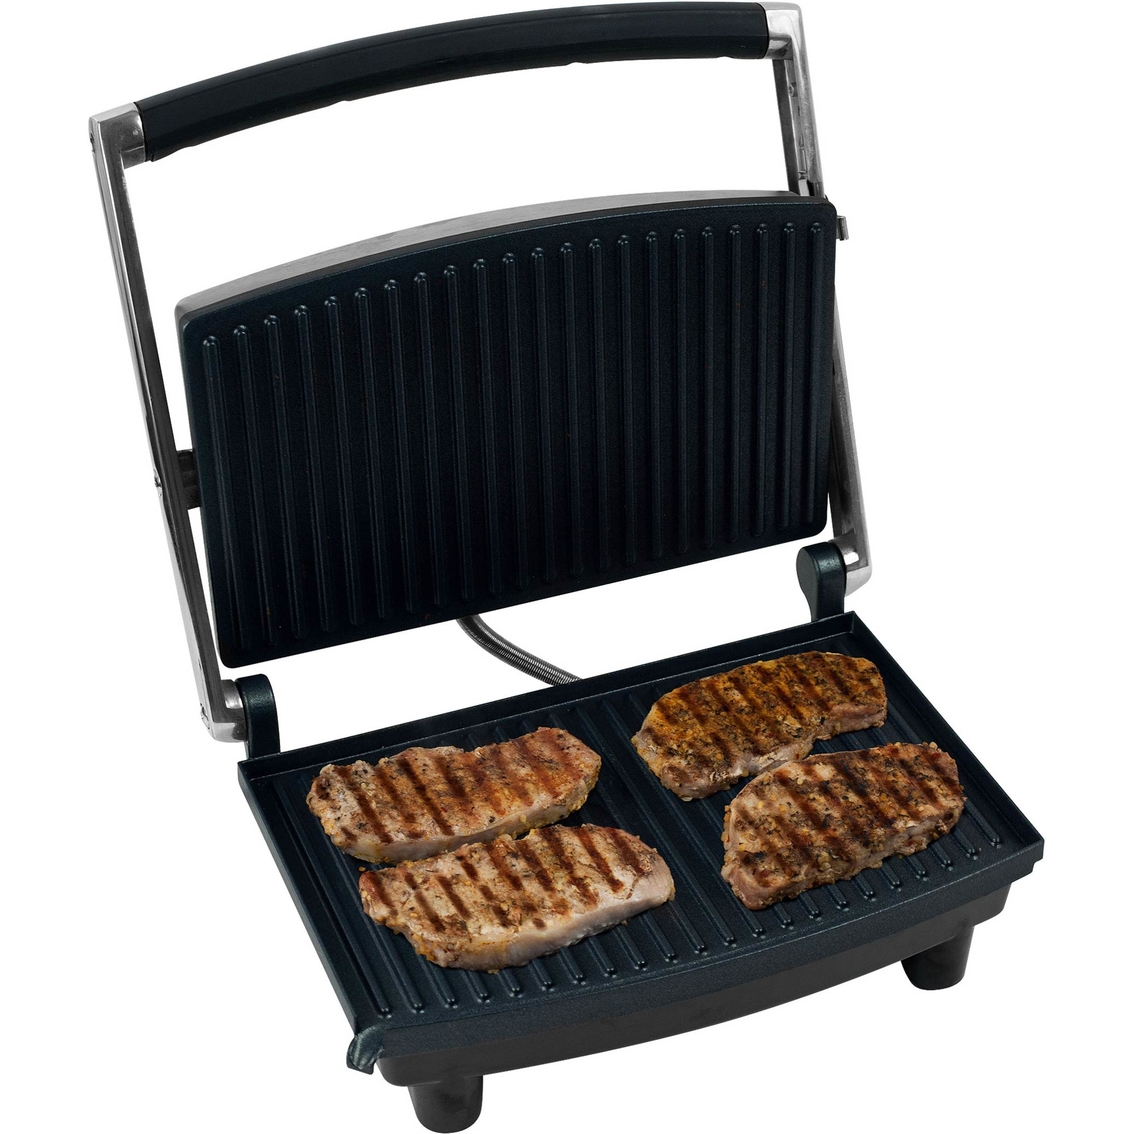 Chef Buddy Panini Press Grill and Gourmet Sandwich Maker - Image 2 of 4